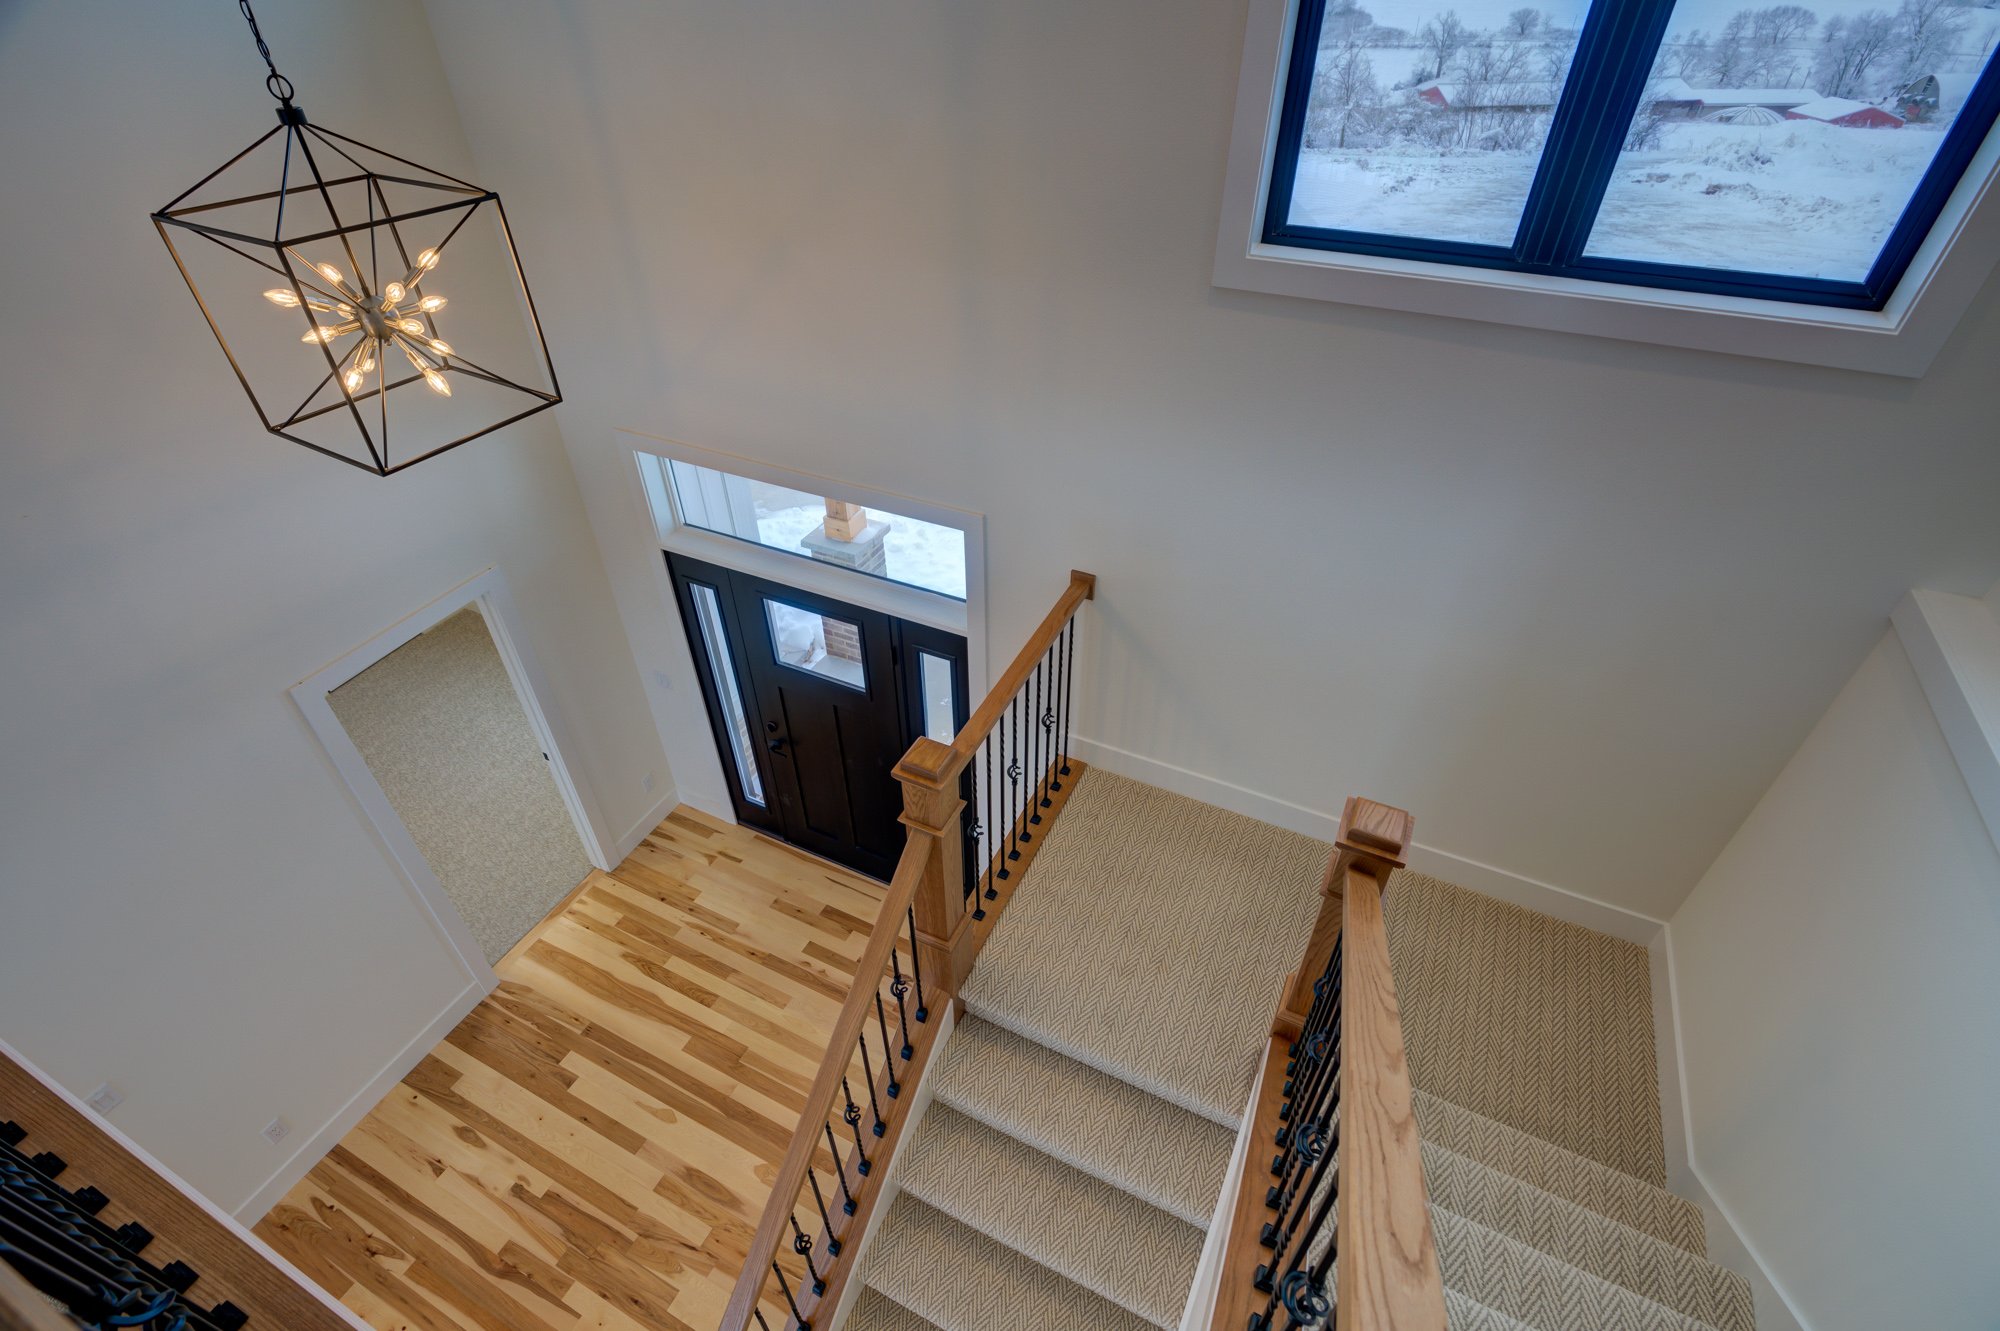 Looking down stairs to entryway